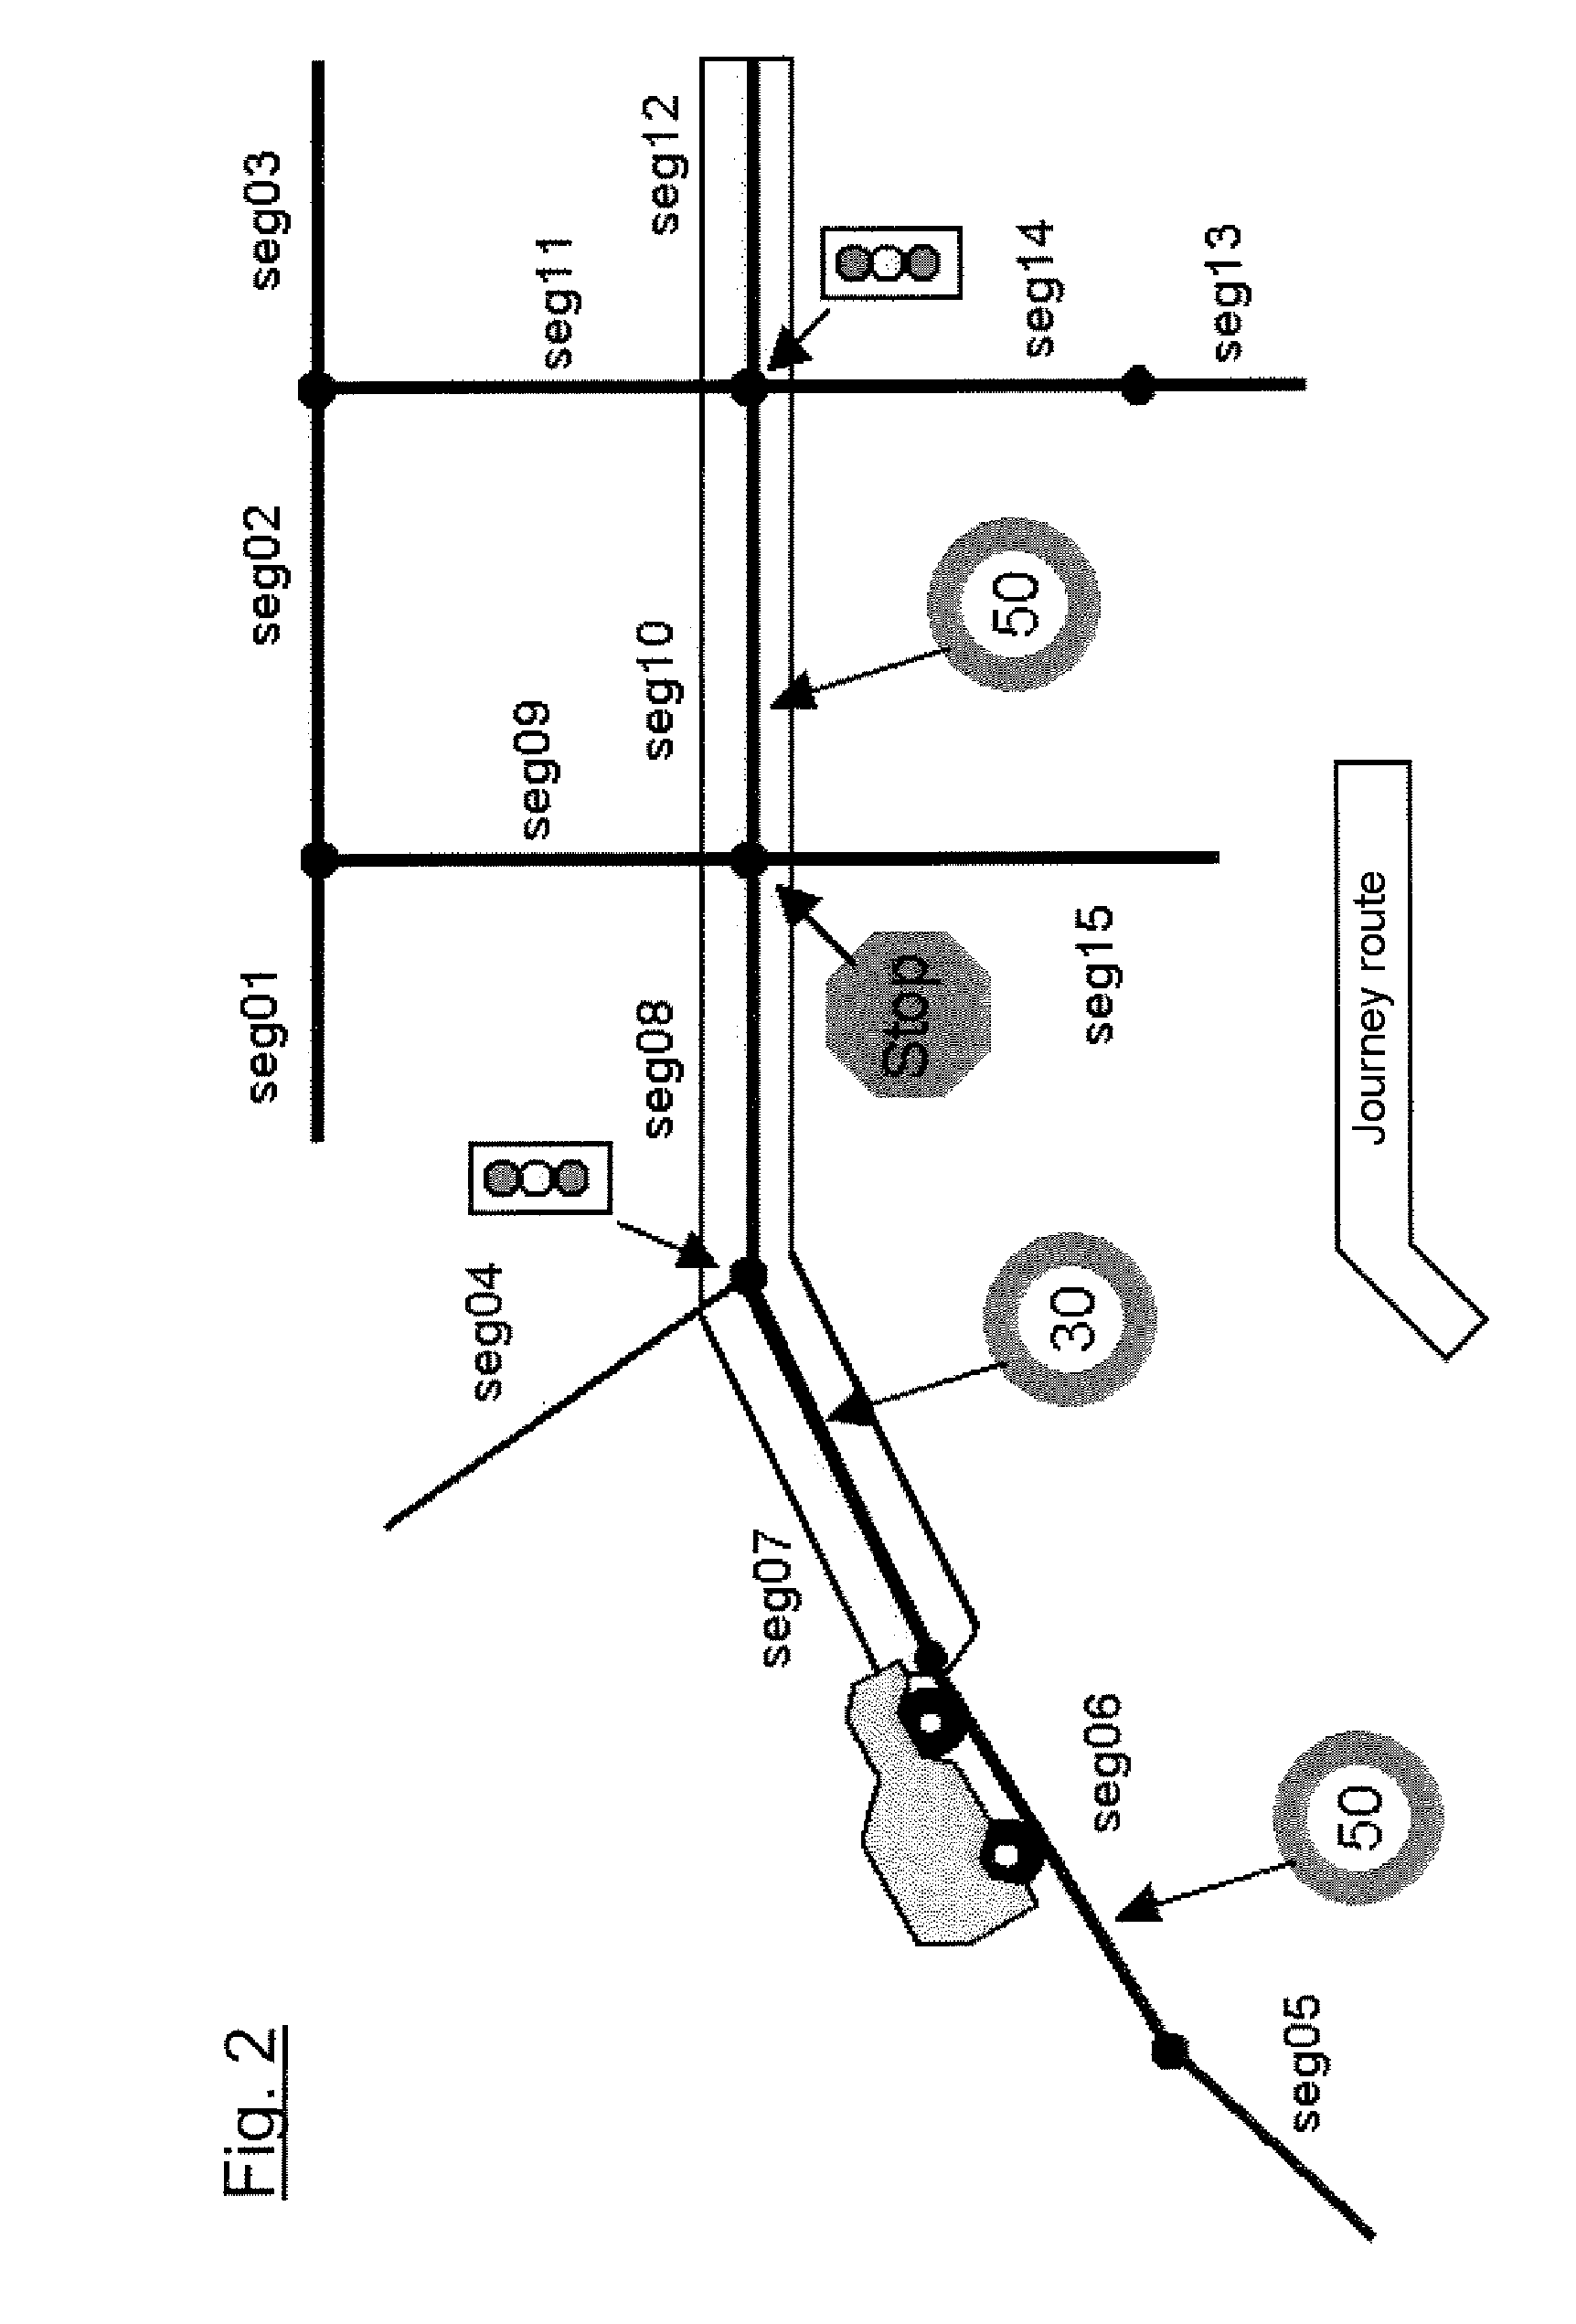 Driving Route Situation Prediction For Vehicle Performance Optimization